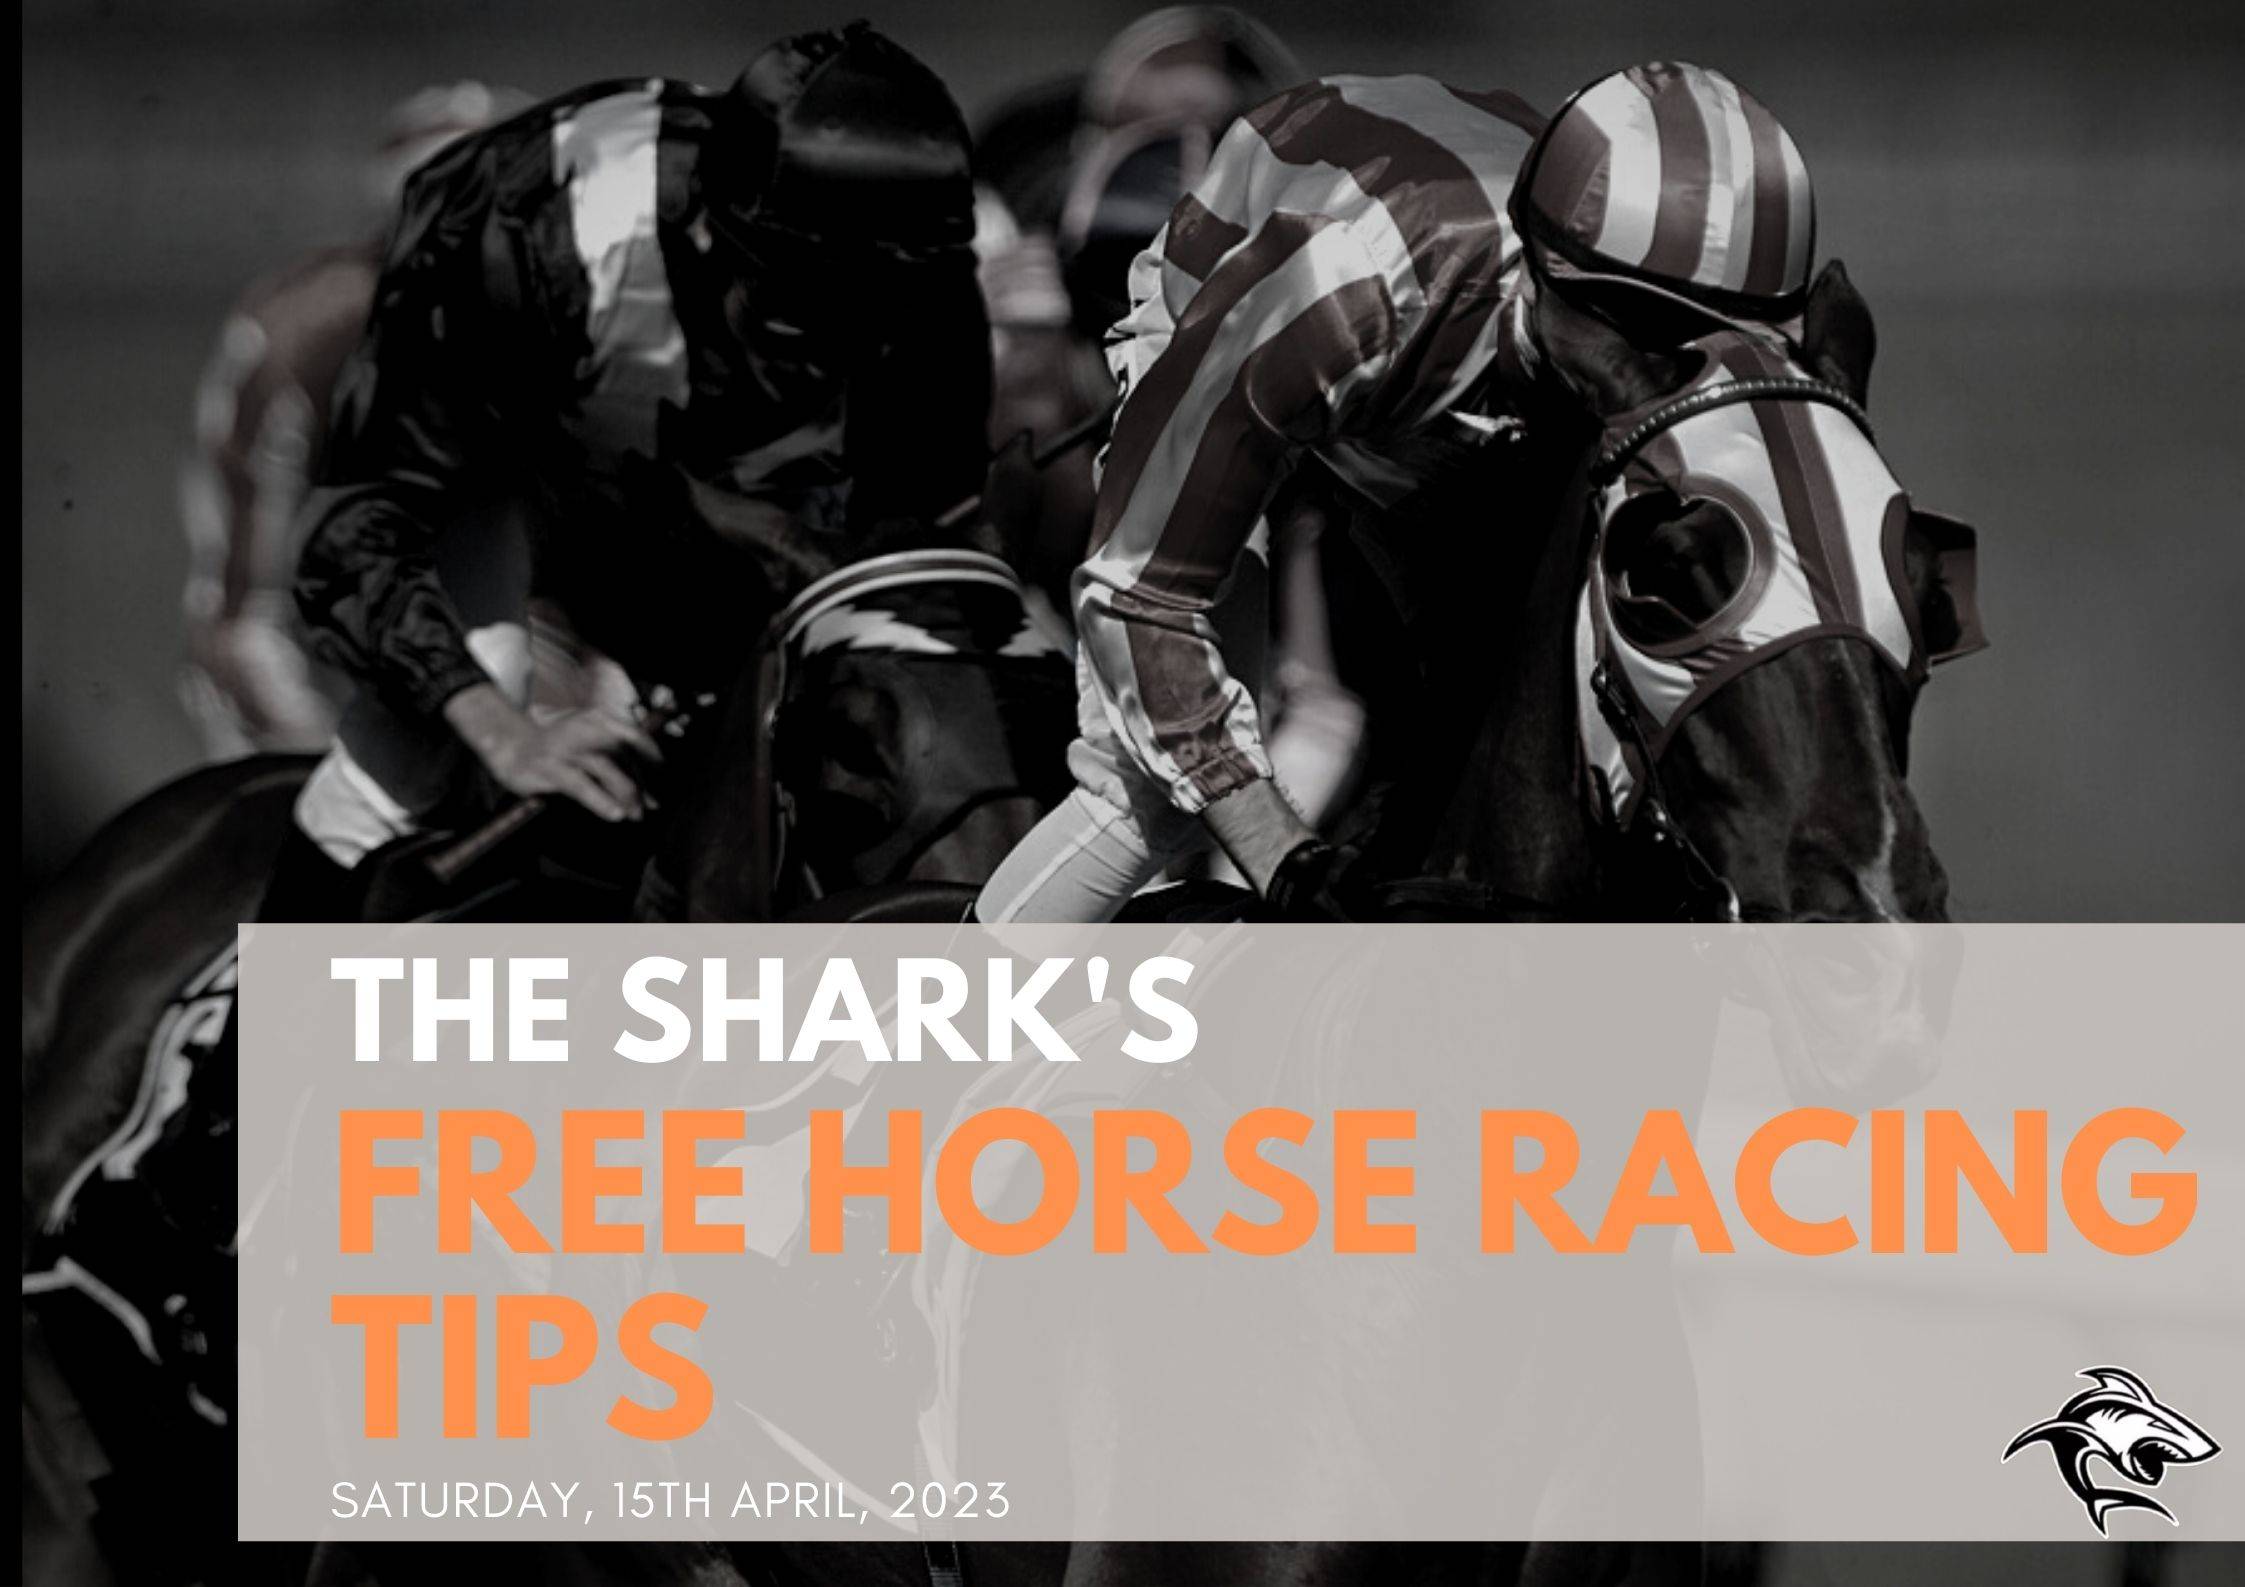 Free Horse Racing Tips - 15th Apr